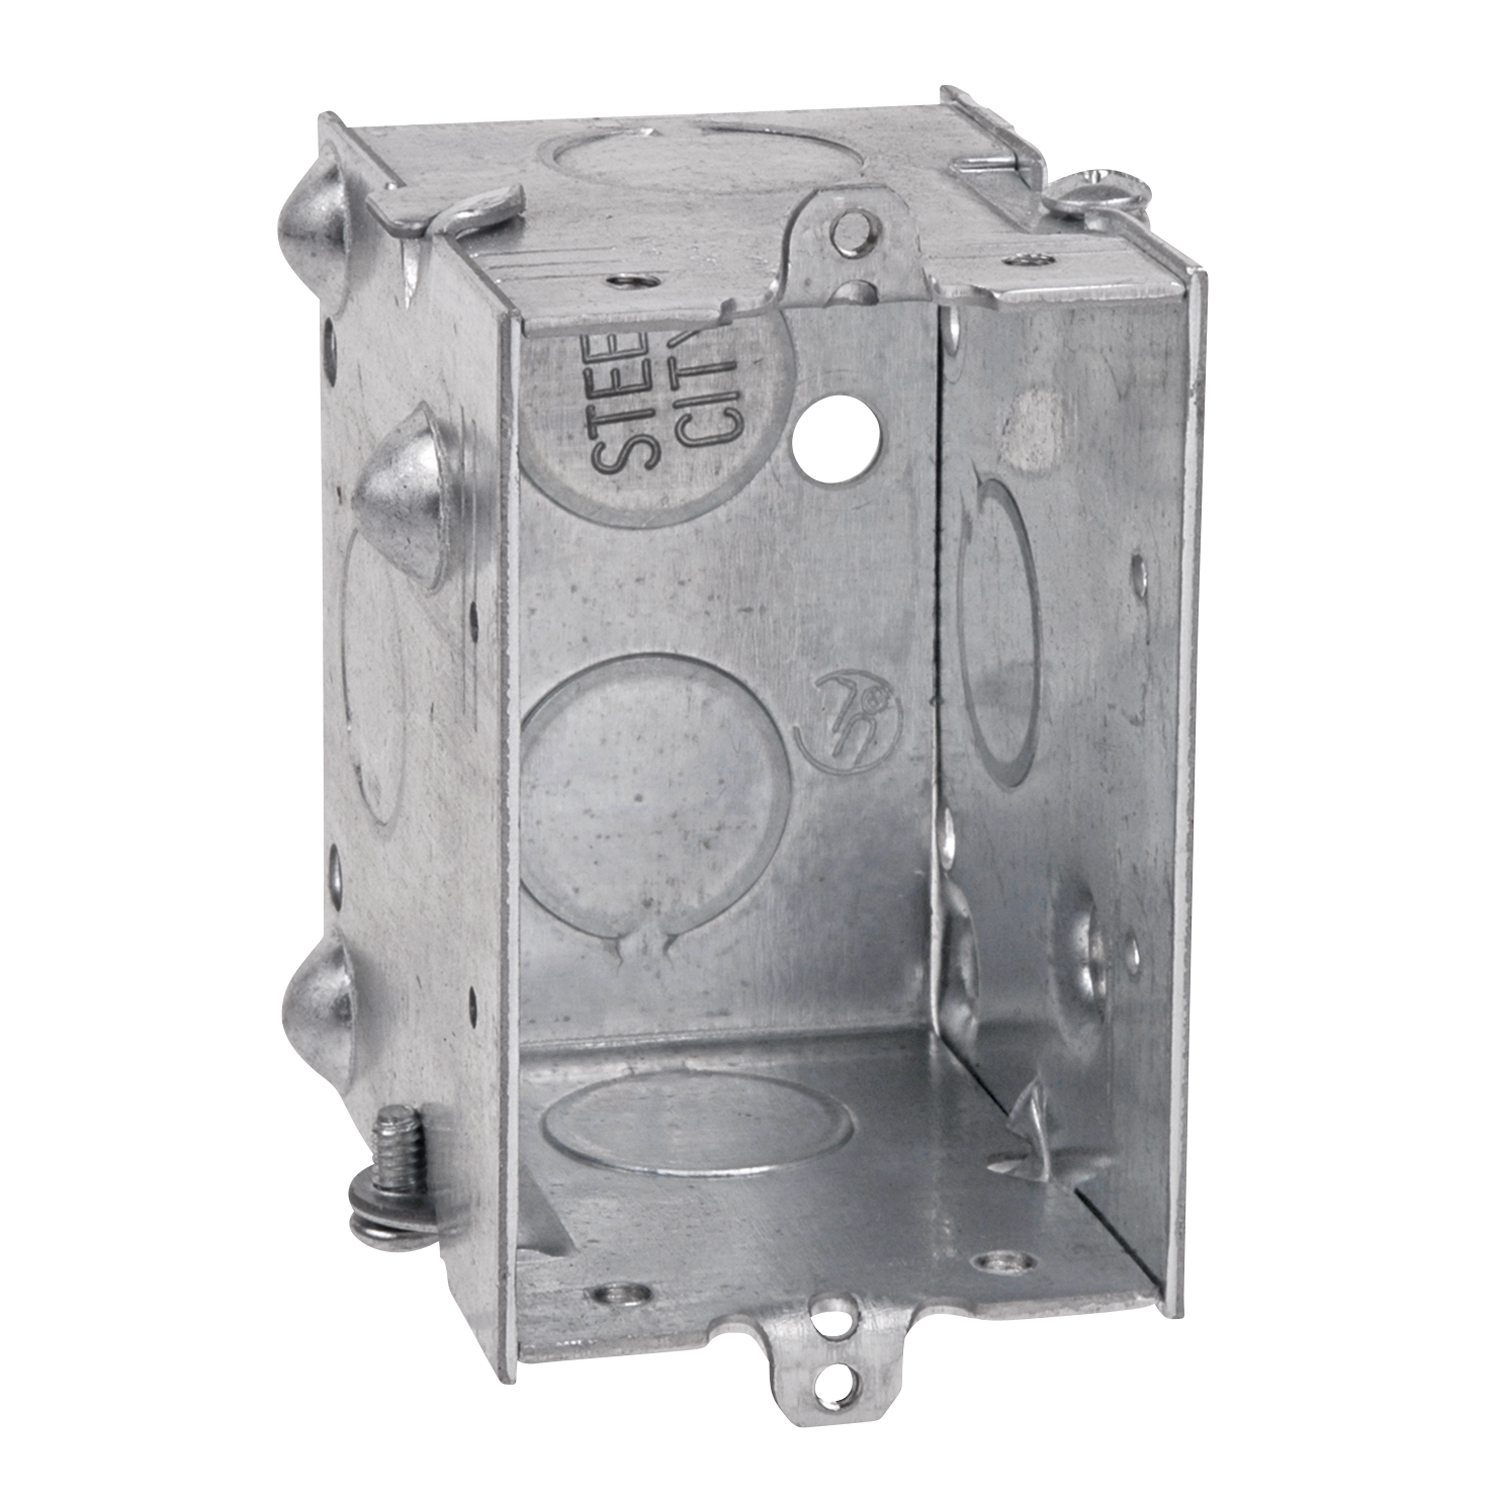 CDLE-25 Metallic Switch Box Steel City;ABB - Installation Products